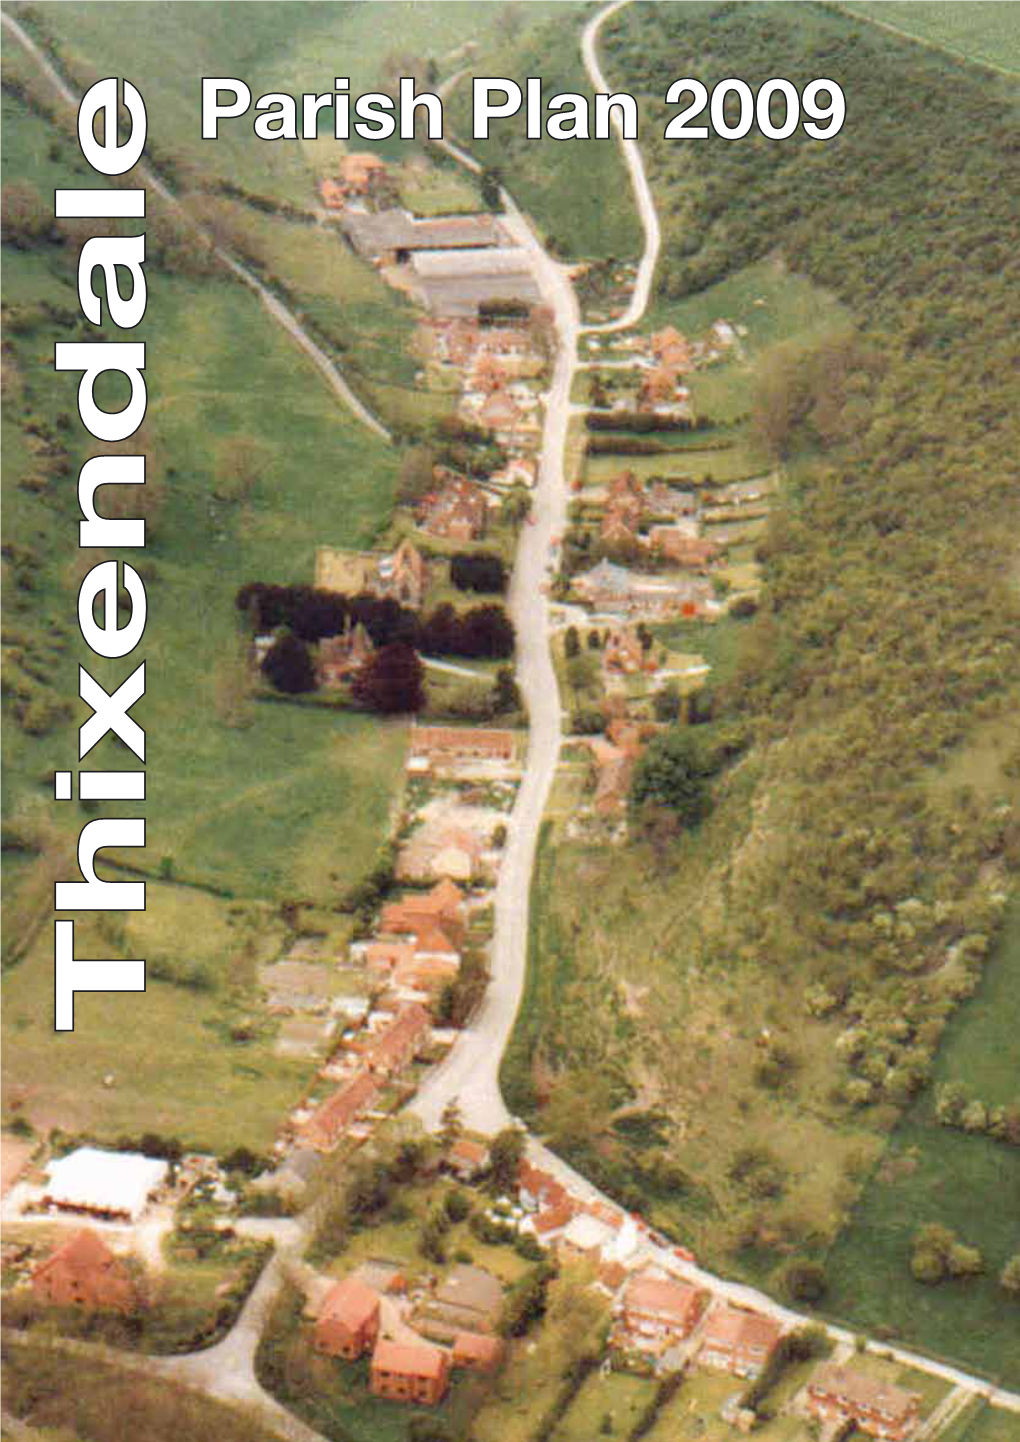 Parish Plan 2009 Thixendale Cover Photograph Courtesy of Steve Lyus Thanks to Everyone Who Has Contributed Photographs